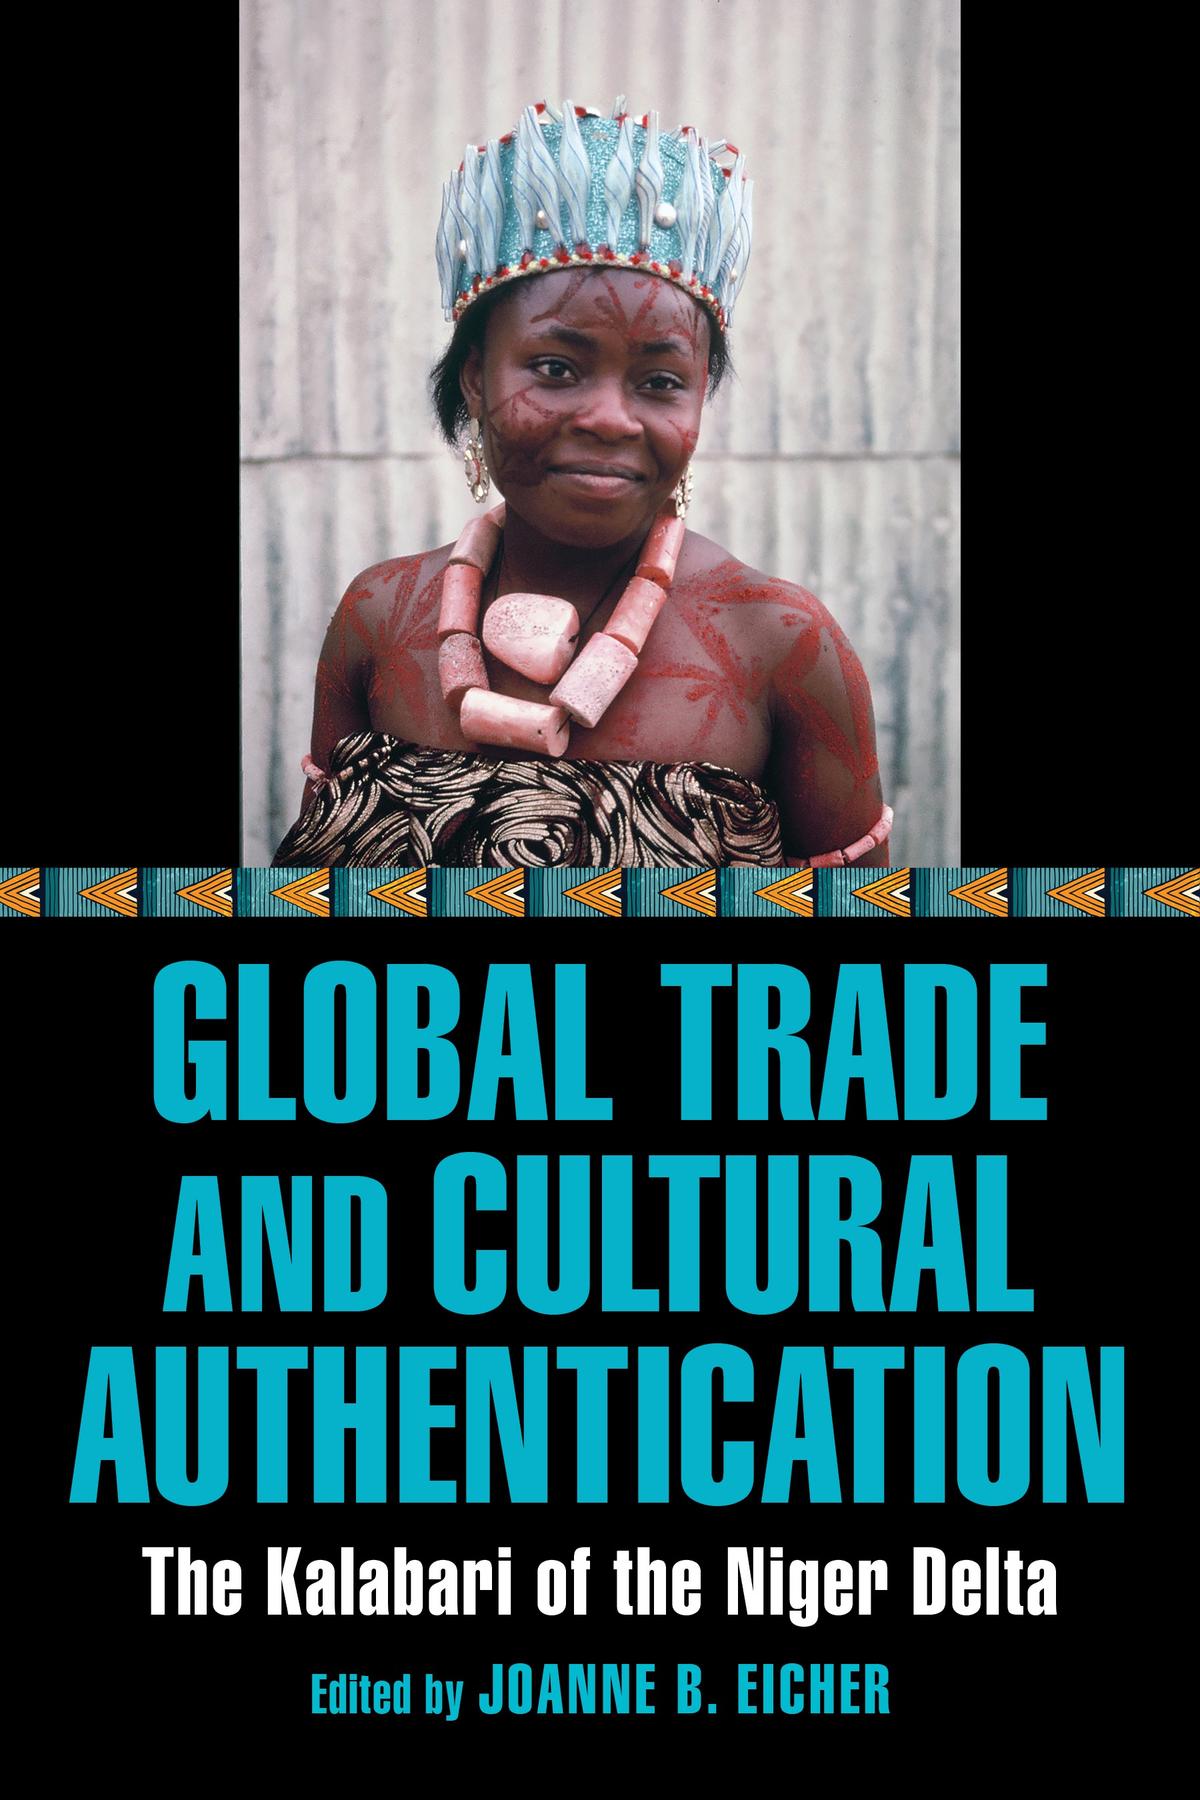 Global Trade and Cultural Authentication, book cover